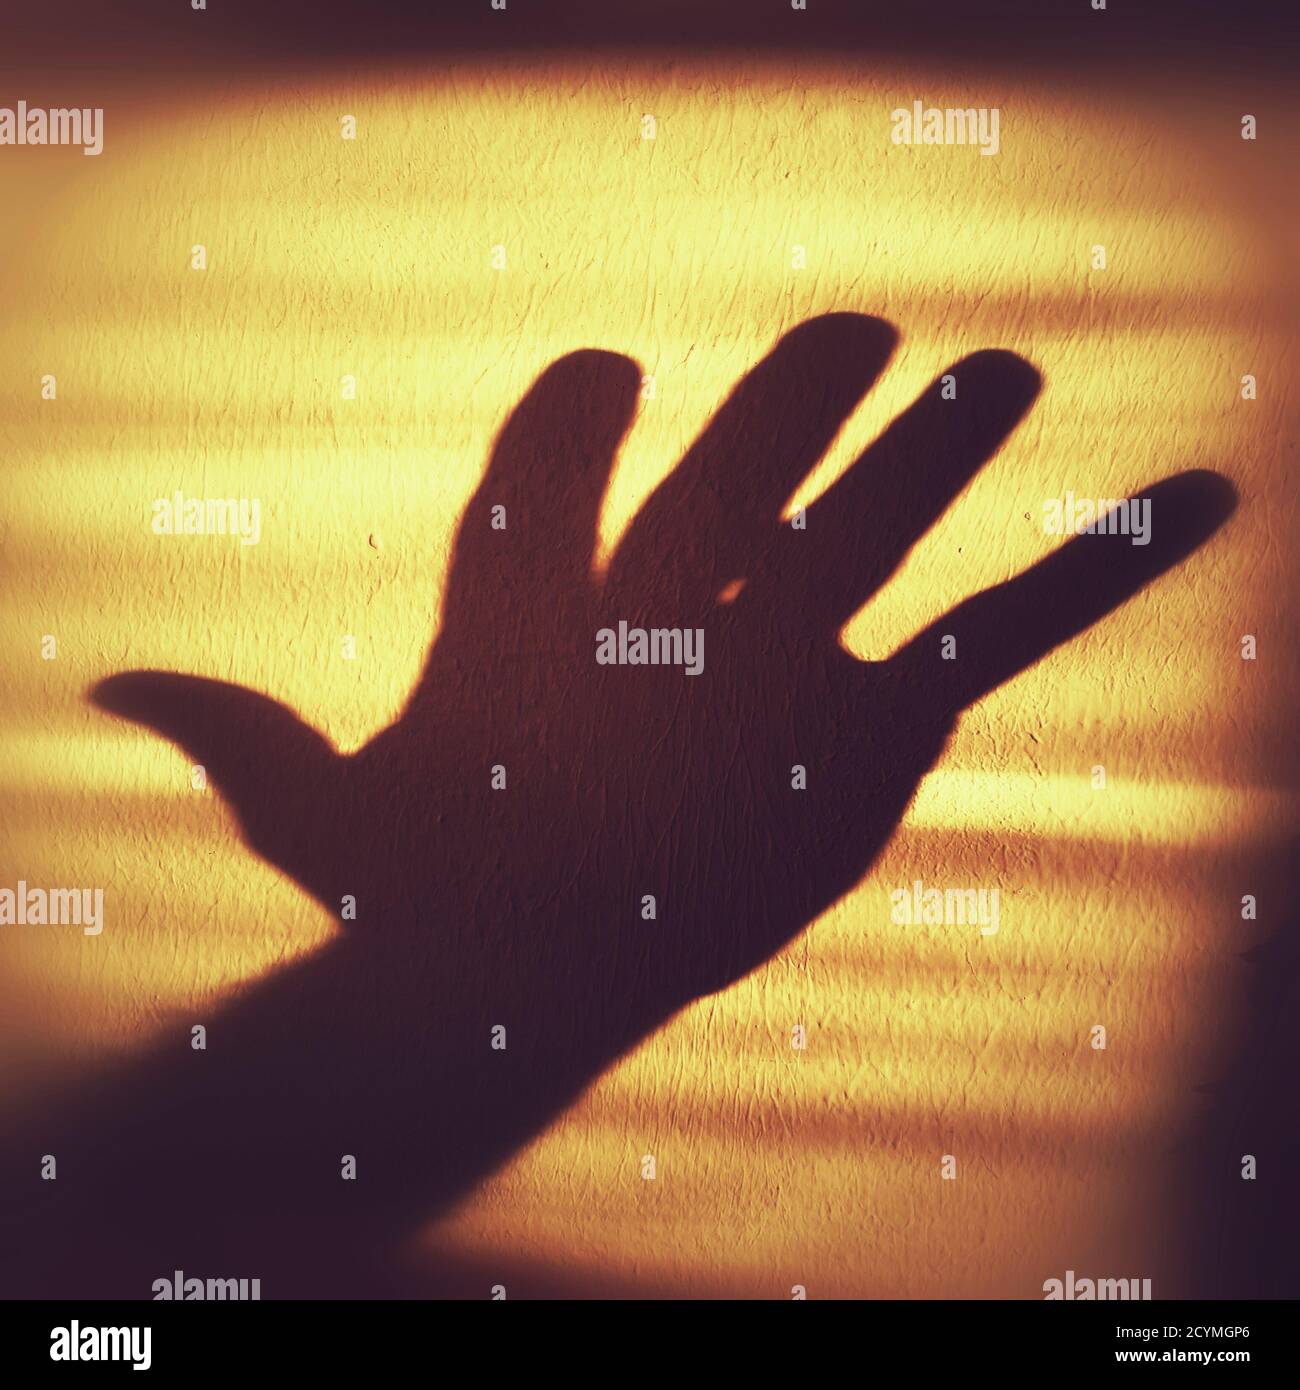 Shadow of a hand showing five fingers on a wall. Stock Photo